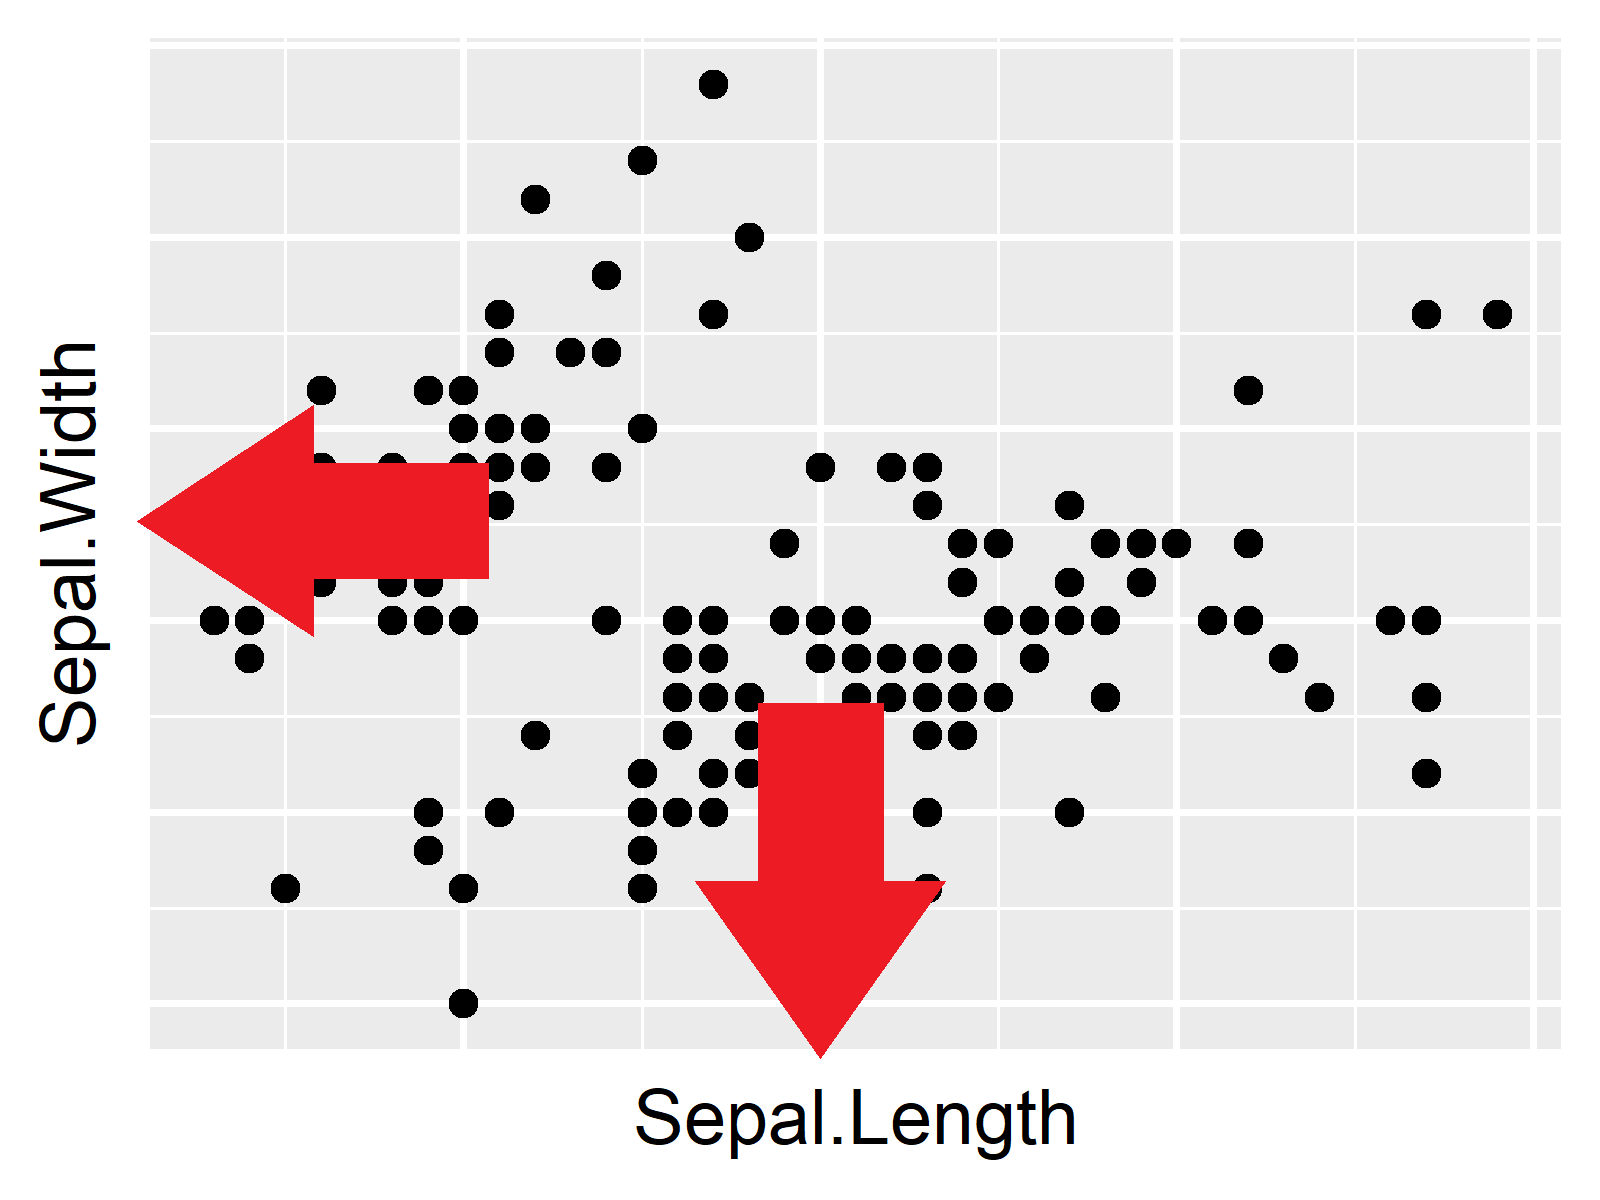 ggplot2 without axis labels and ticks